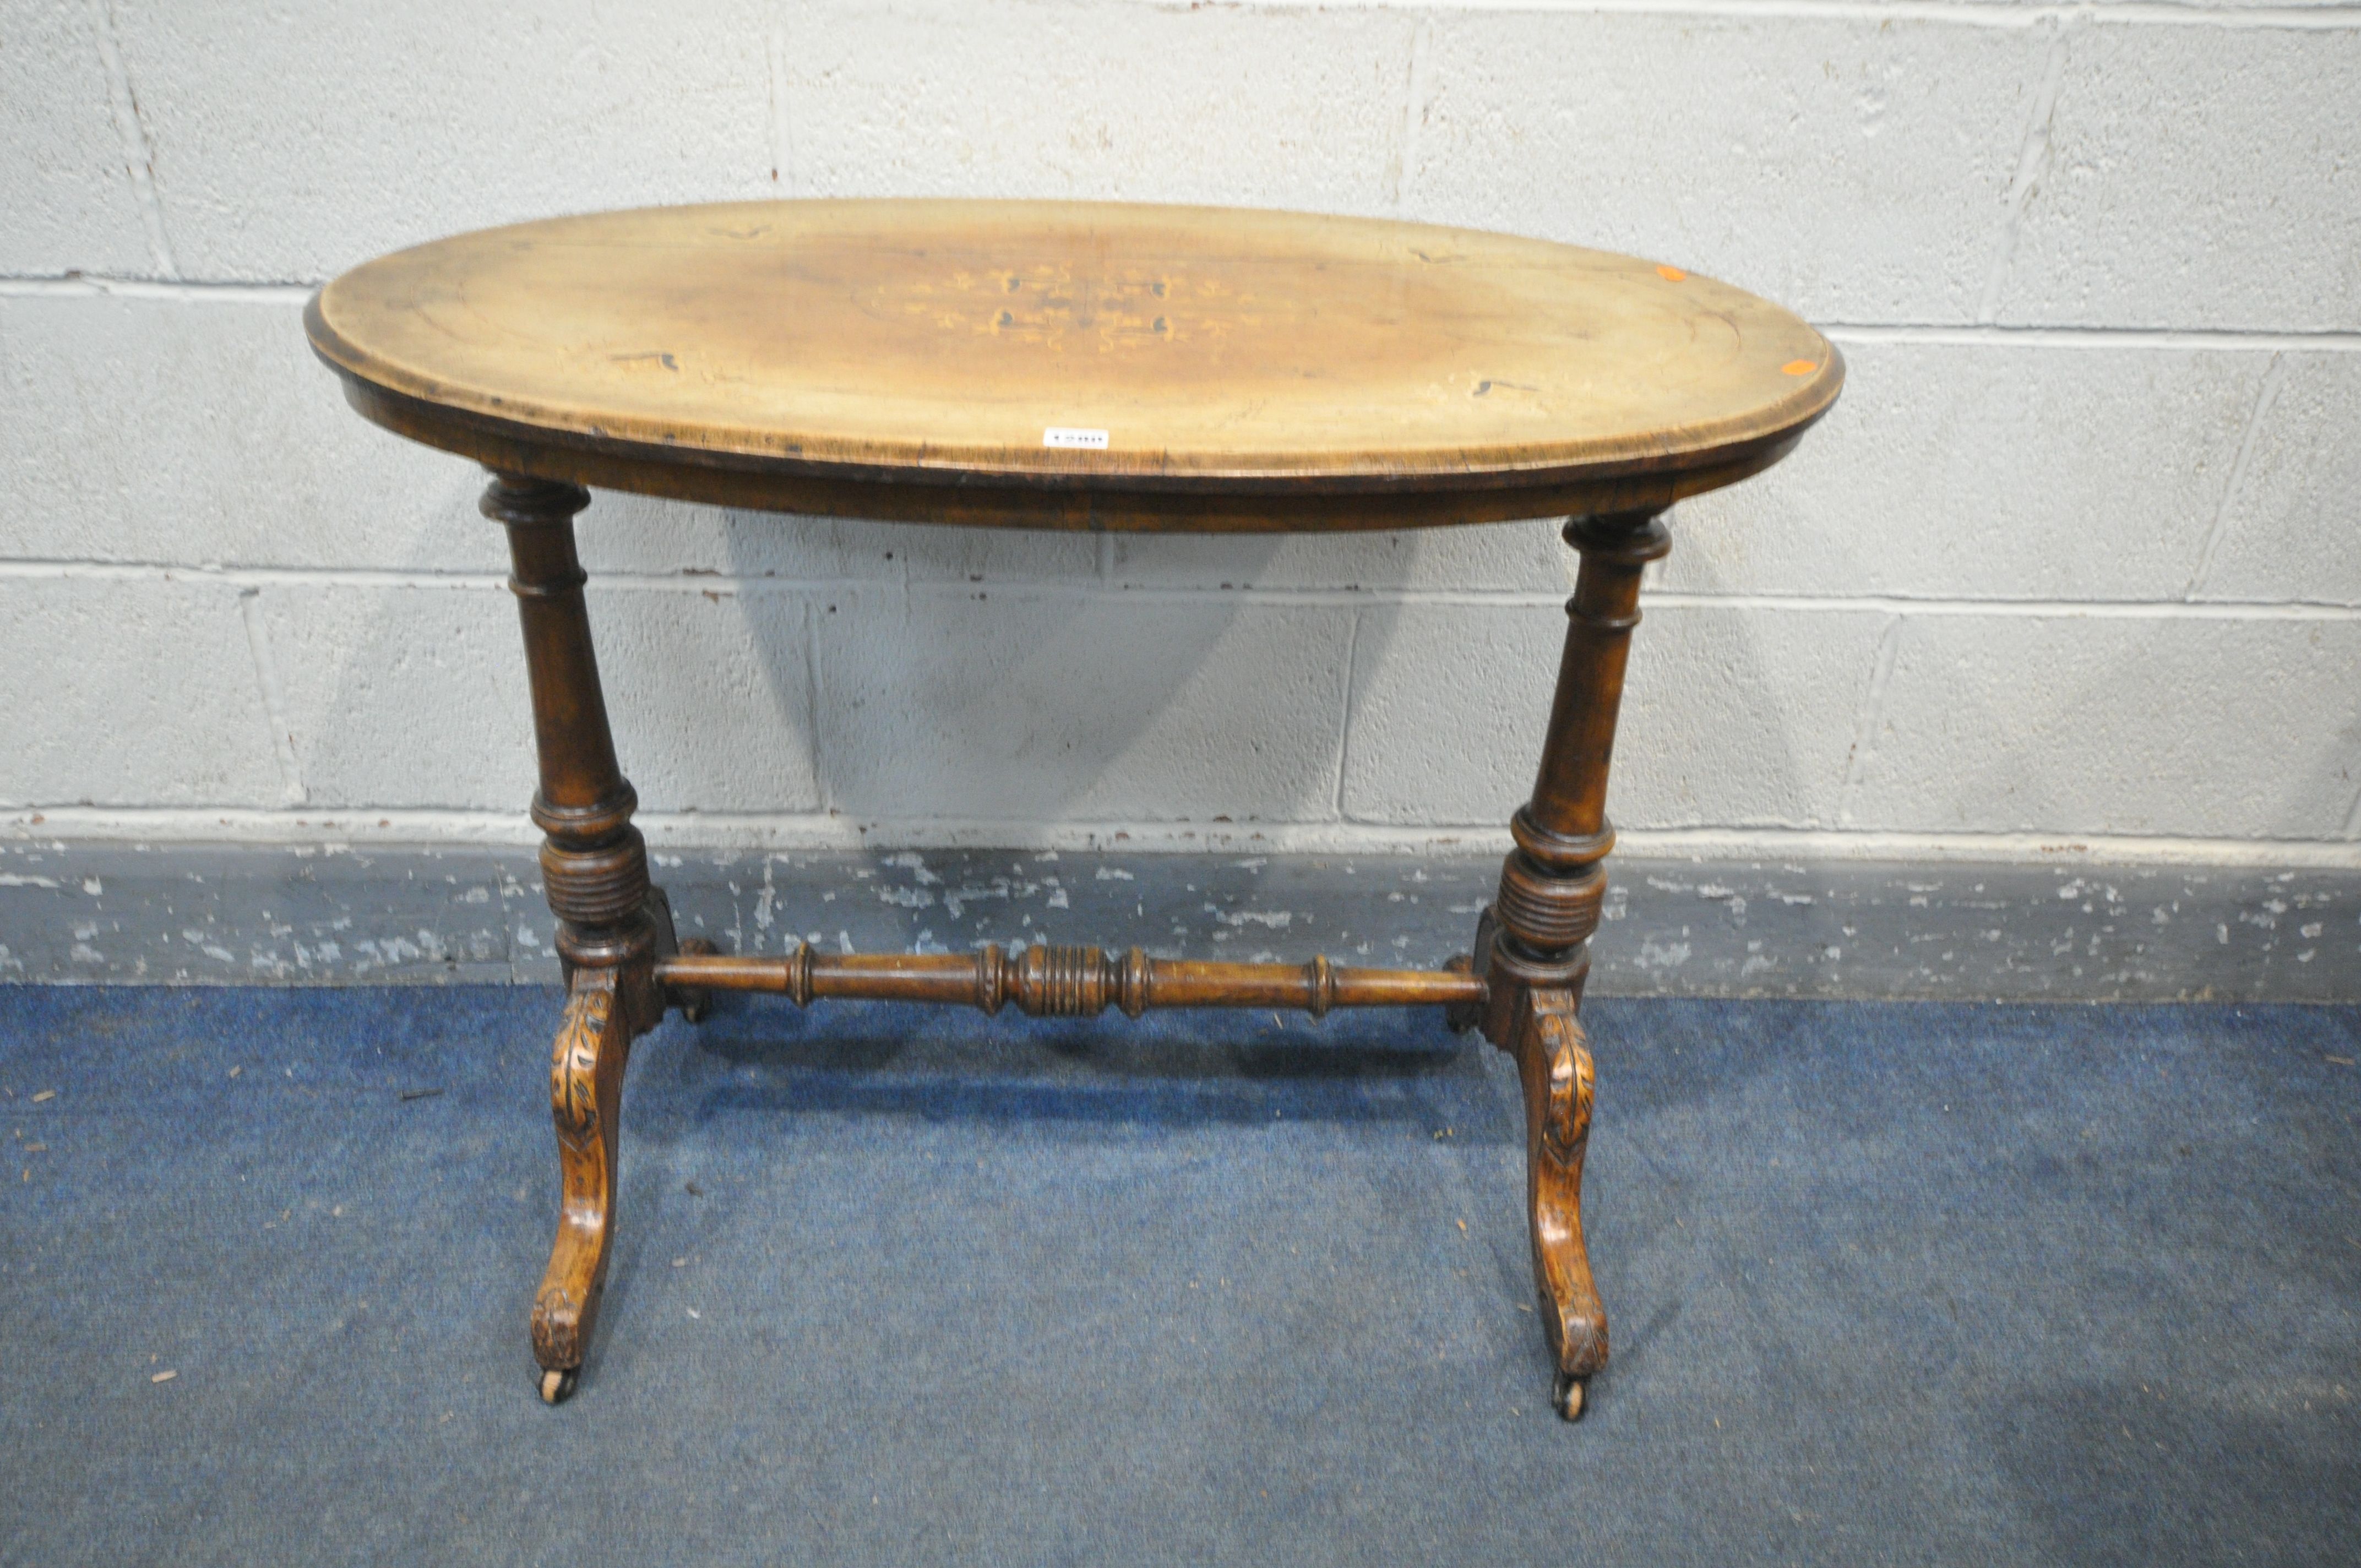 A VICTORIAN OVAL WALNUT CENTRE TABLE, with floral marquetry inlay, with turned supports, on carved